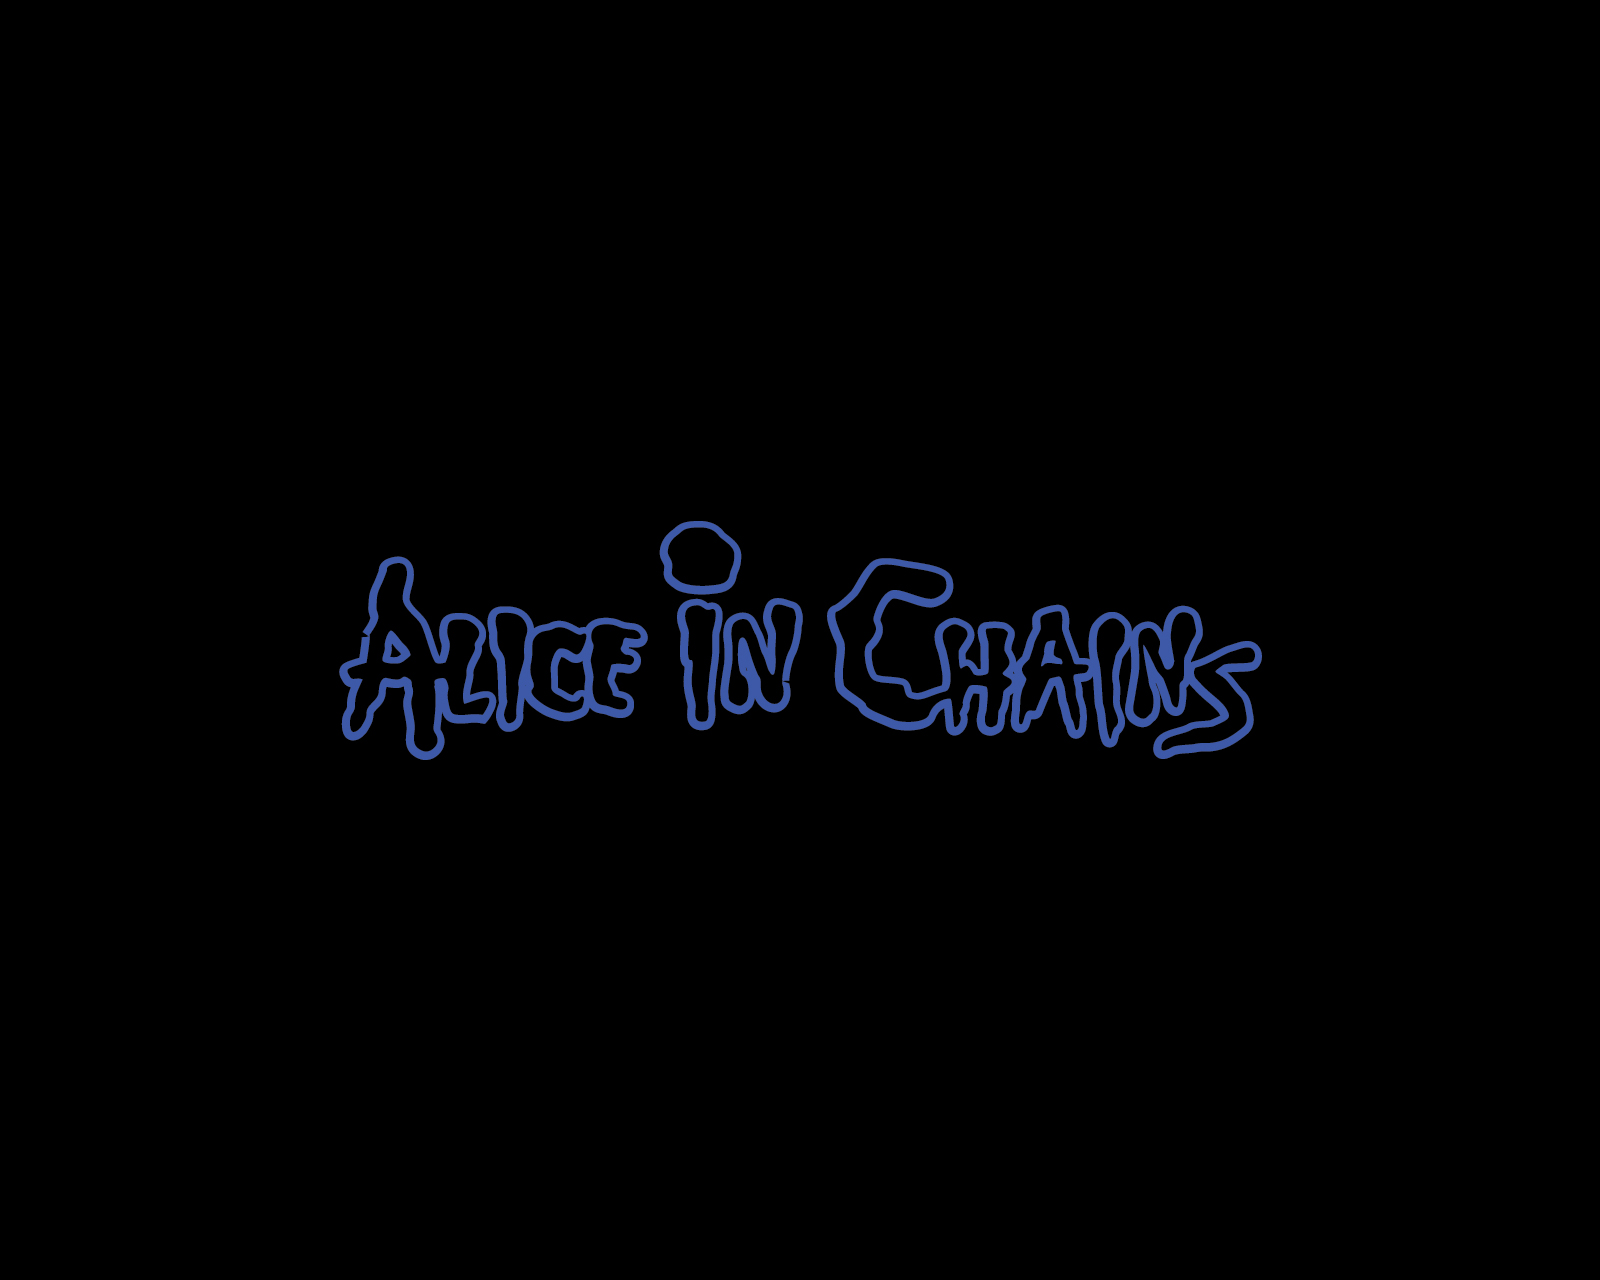 wallpapers hard rock, alice in chains, music, grunge, heavy metal